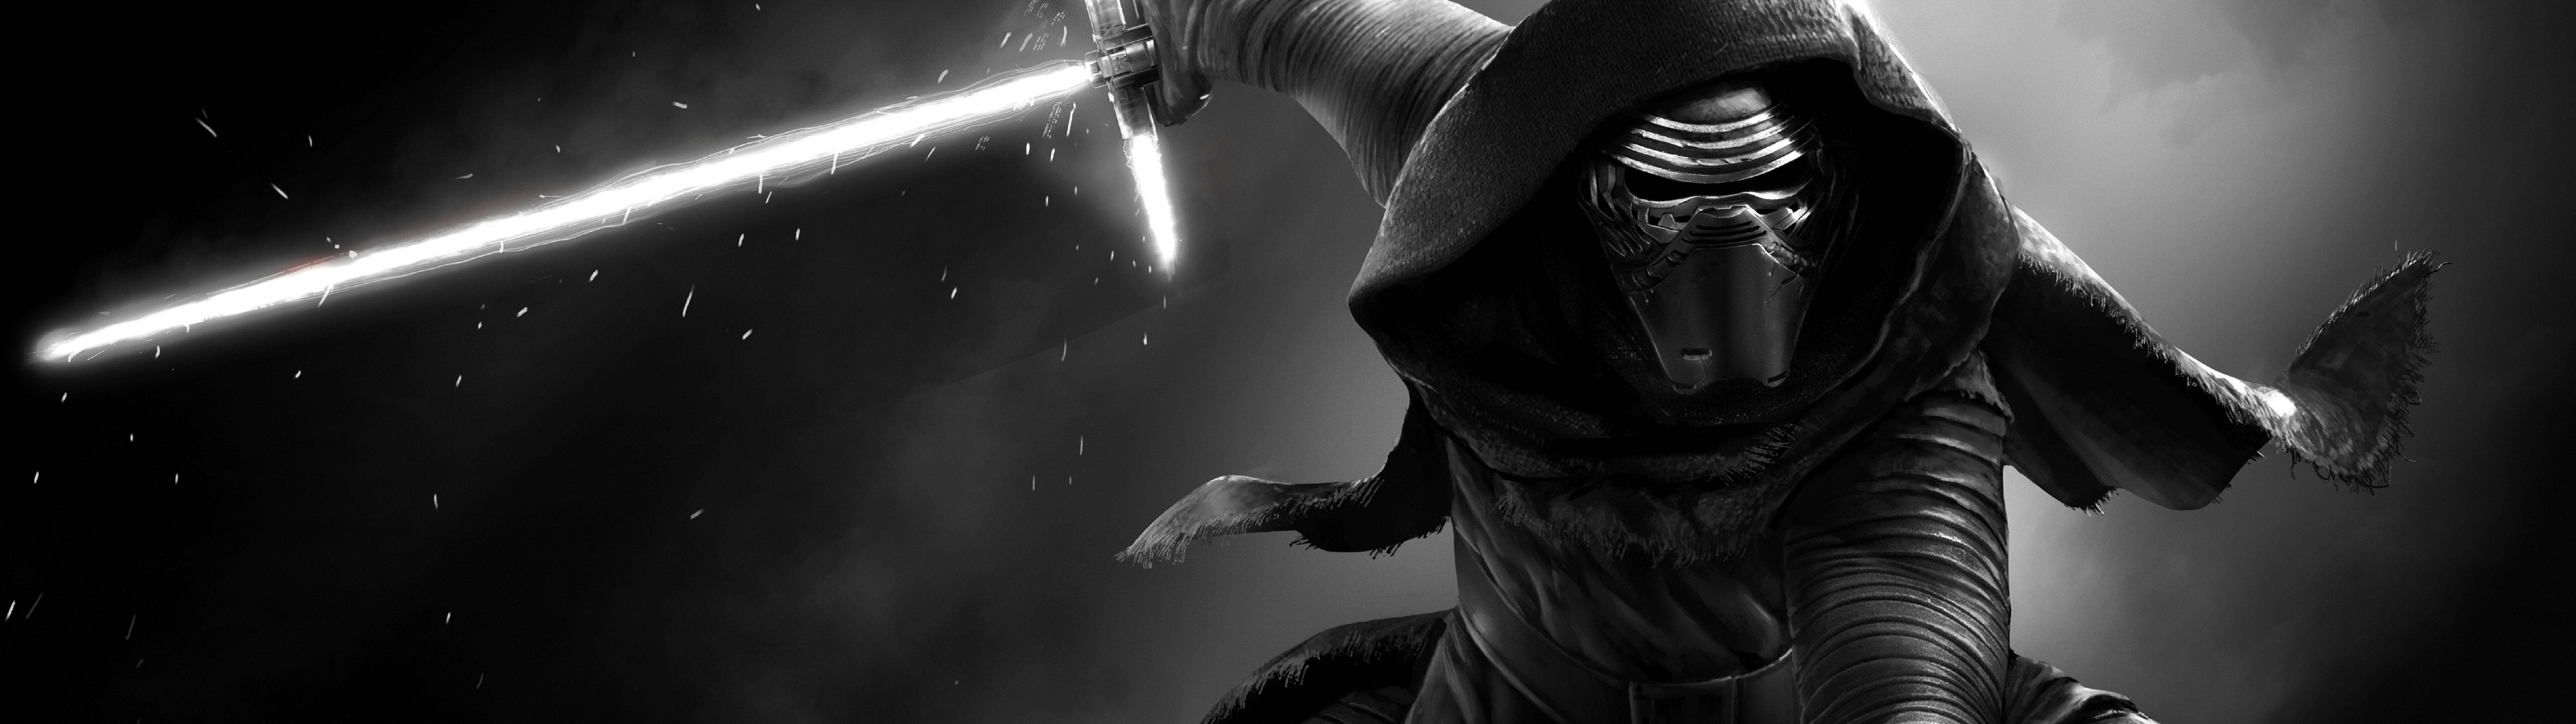 4k Dual Monitor Kylo Ren With Lightsaber Background